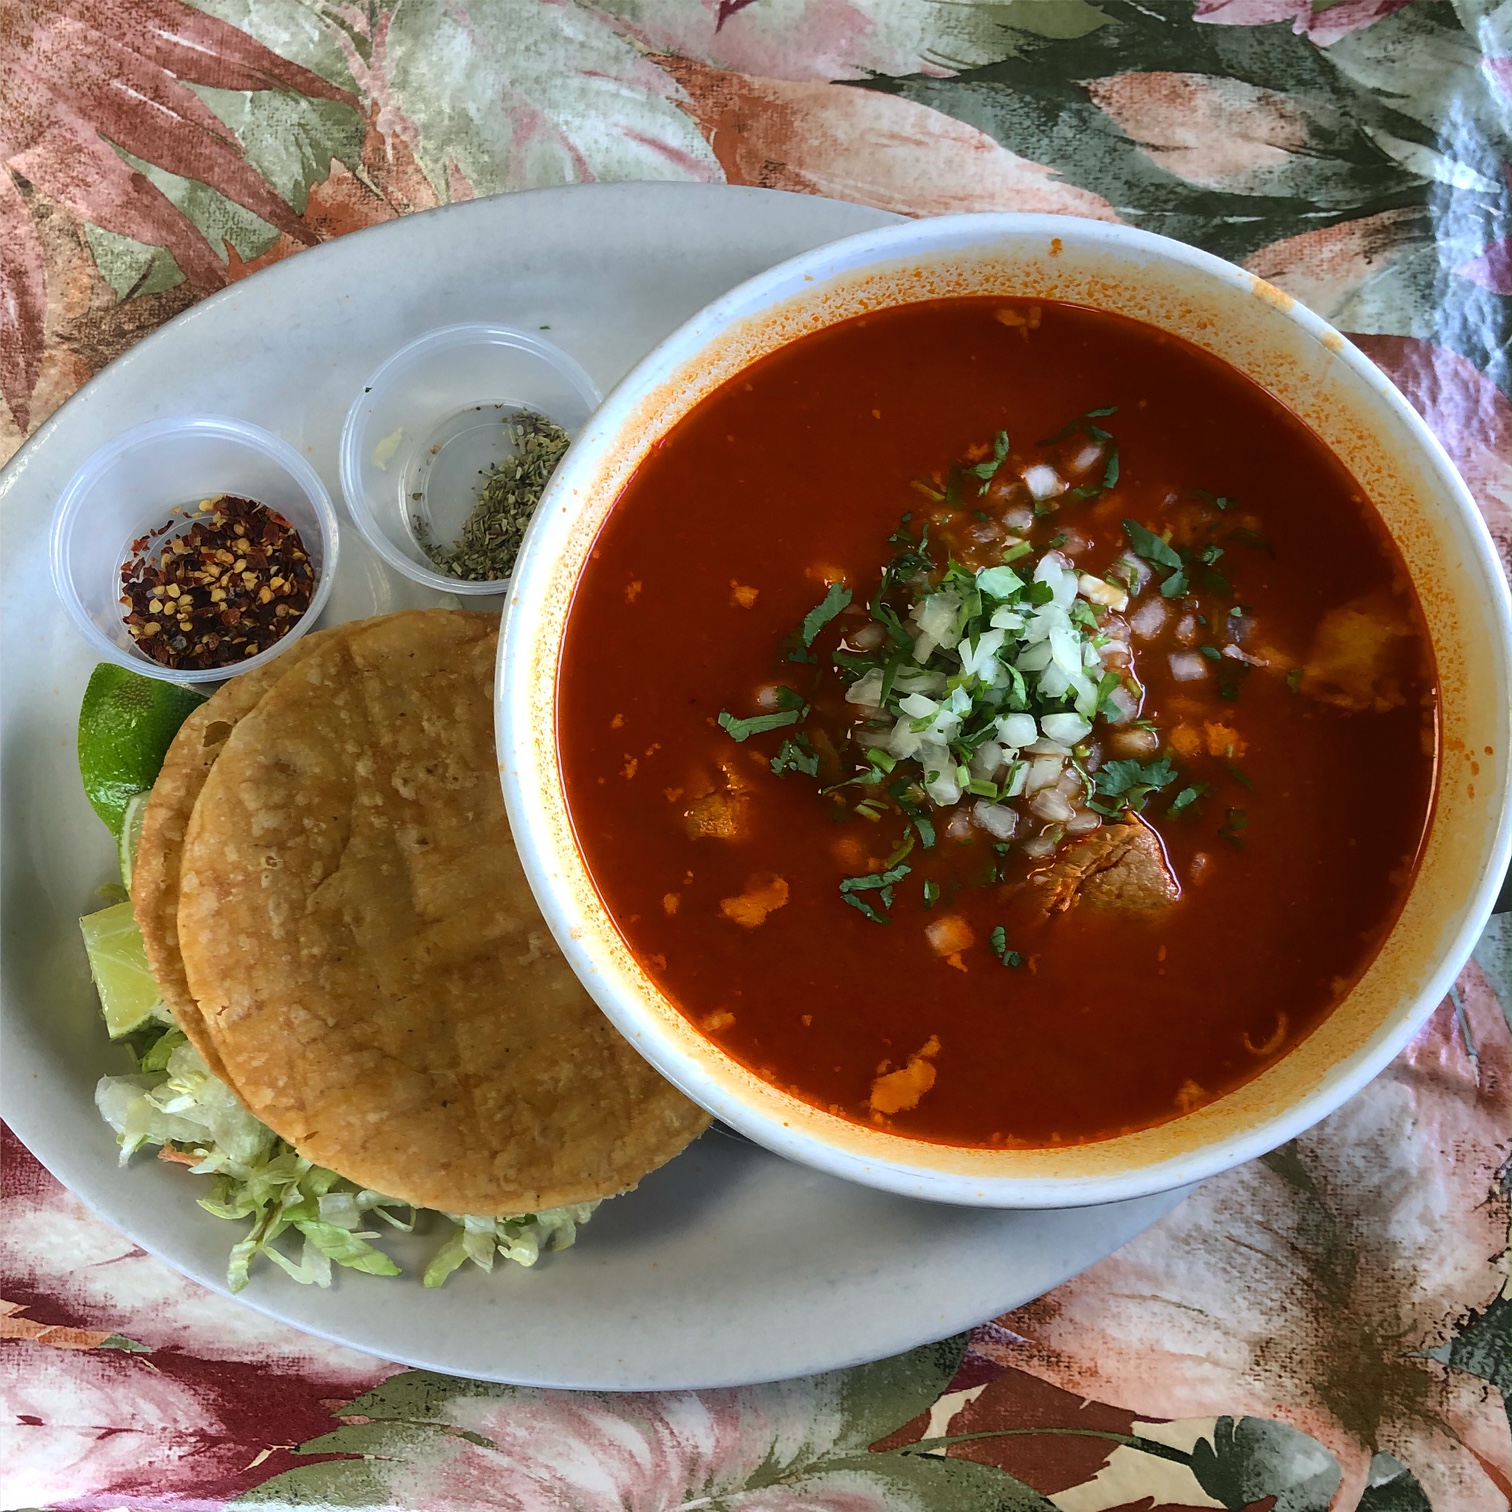 On a floral tablecloth, there is an oval plate with a large white bowl filled with red pozole soup. Beside the bowl on the oval plate, there are mini cups of dried seasoning, fried tostatas on lettuce, and lime wedges. Photo by Alyssa Buckley.